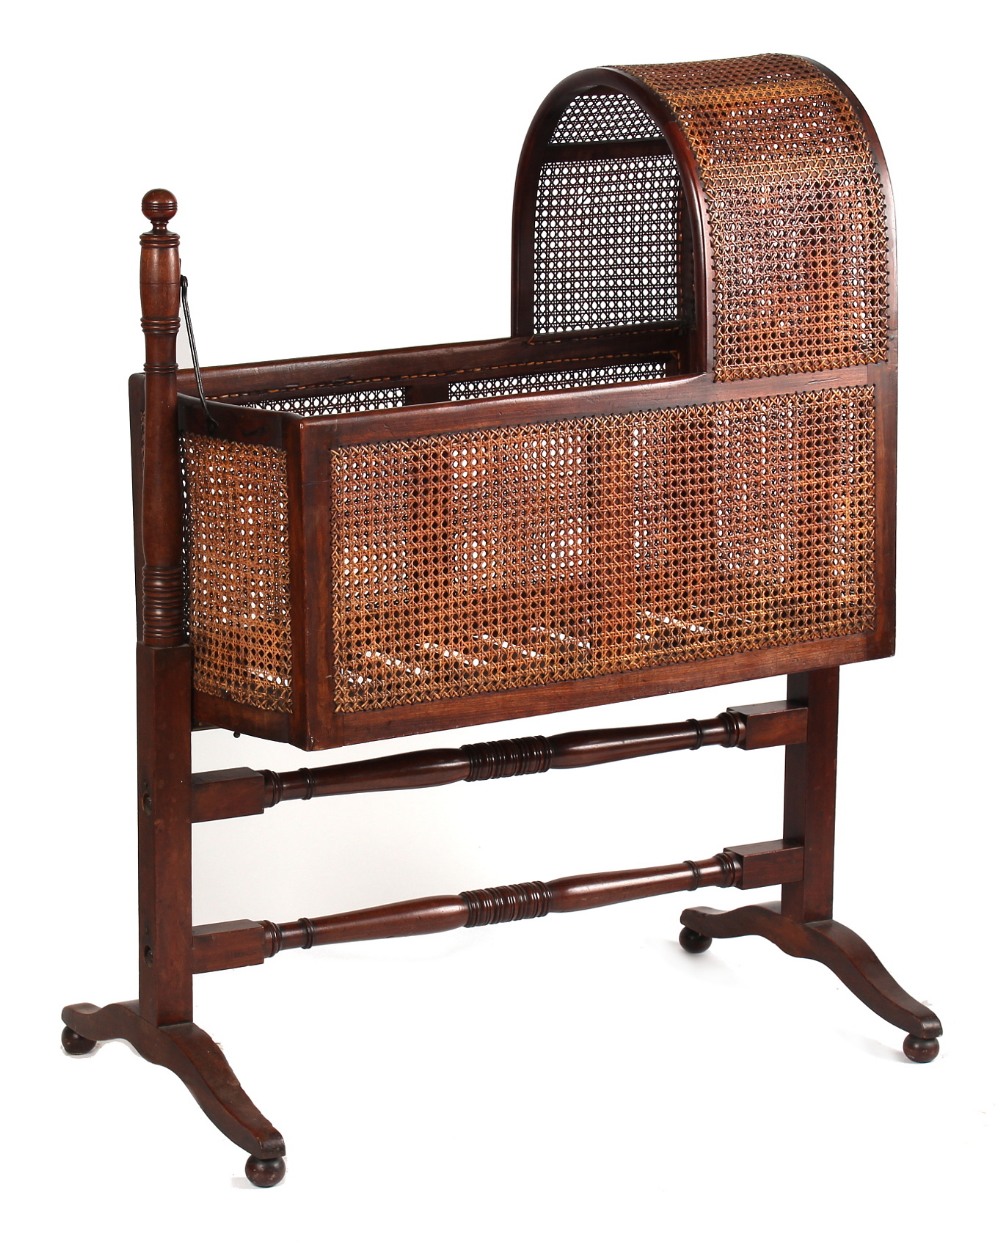 Property of a gentleman - an early 19th century George IV mahogany & cane panelled swinging crib